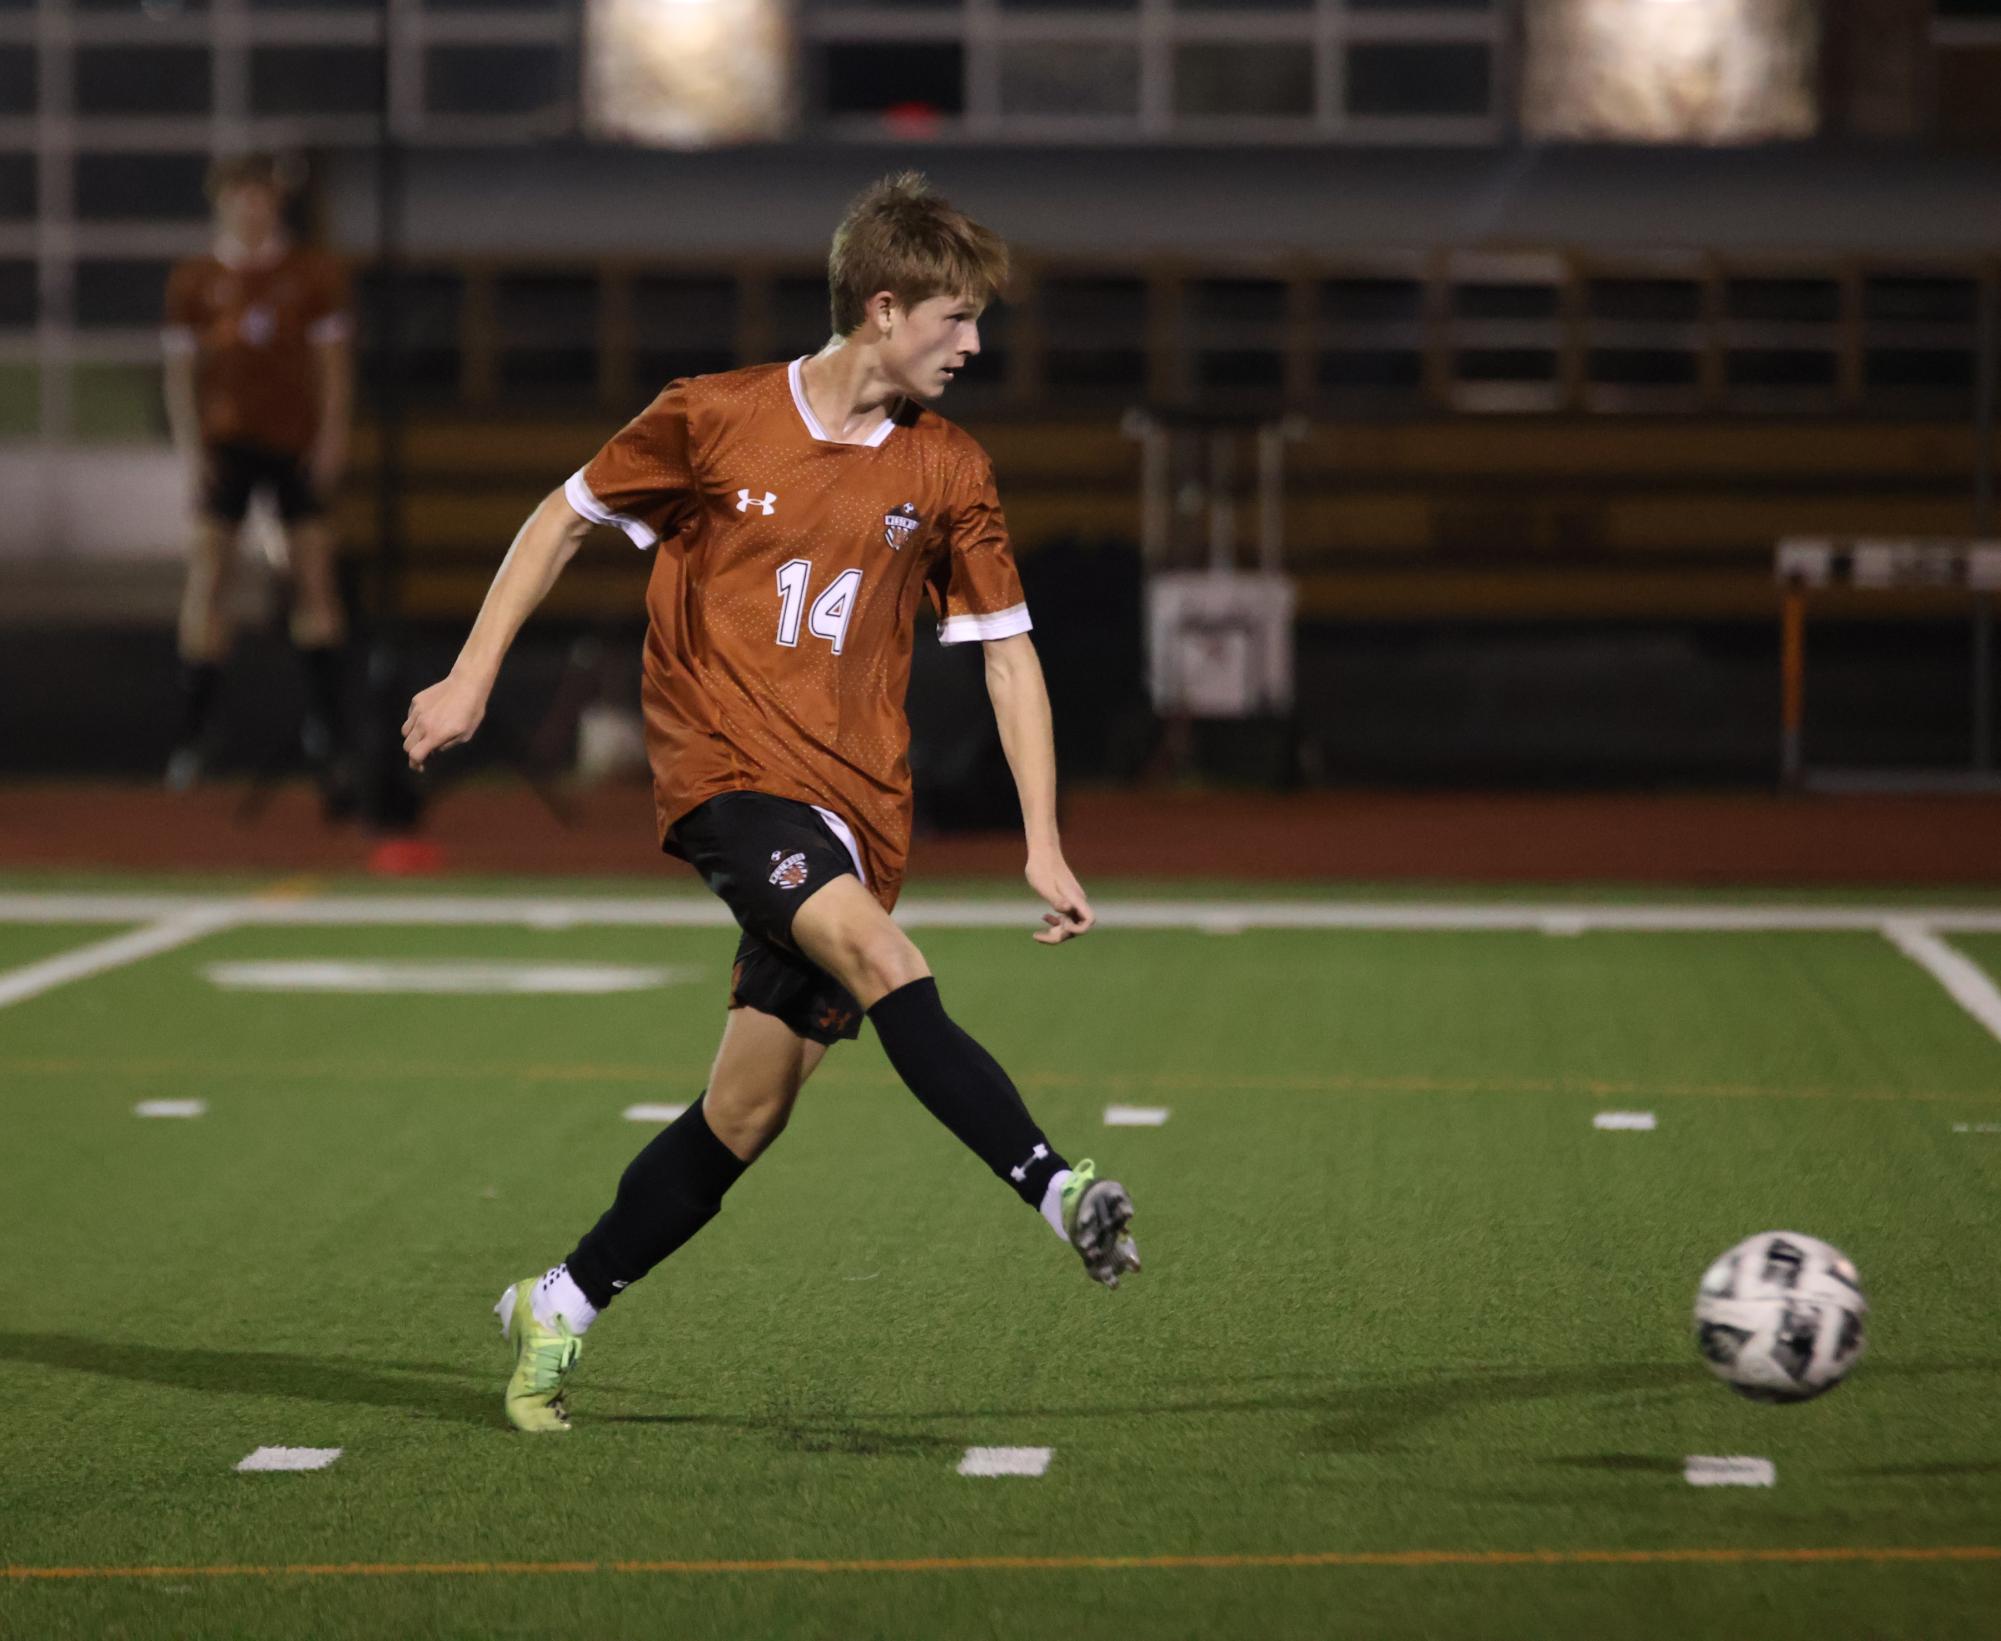 Warriors Make a Comeback with a Tie Against Vandegrift Vipers: Jack Cox ’26 Scores Winning Goal